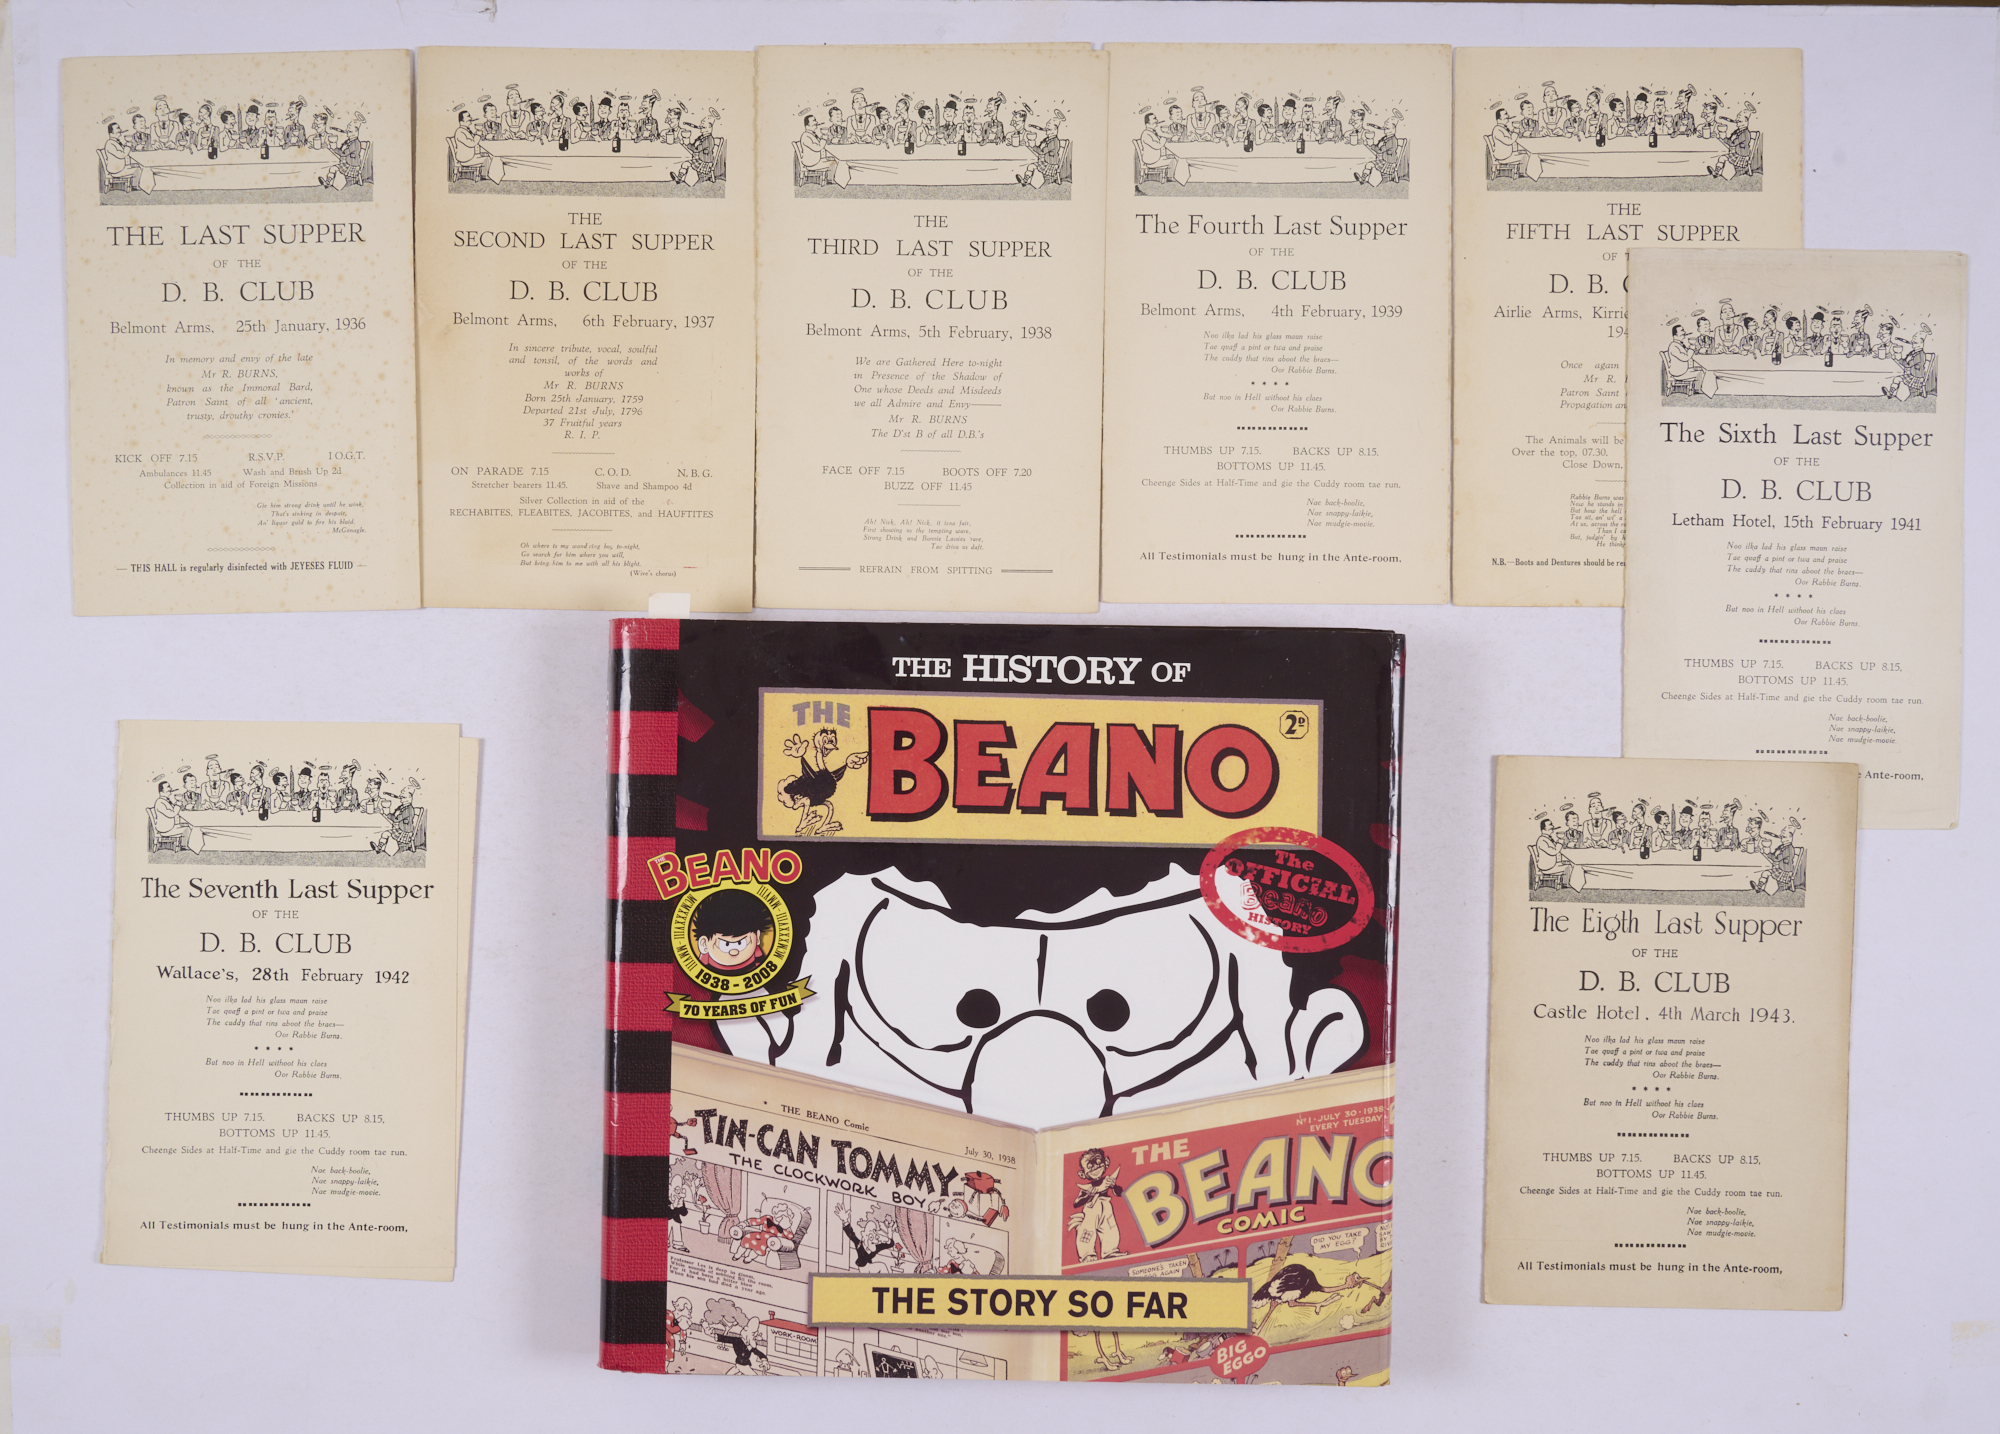 D C Thomson Dandy and Beano Club Burns Night Menus (1936-43) 1-8. All illustrated by Dudley Watkins.